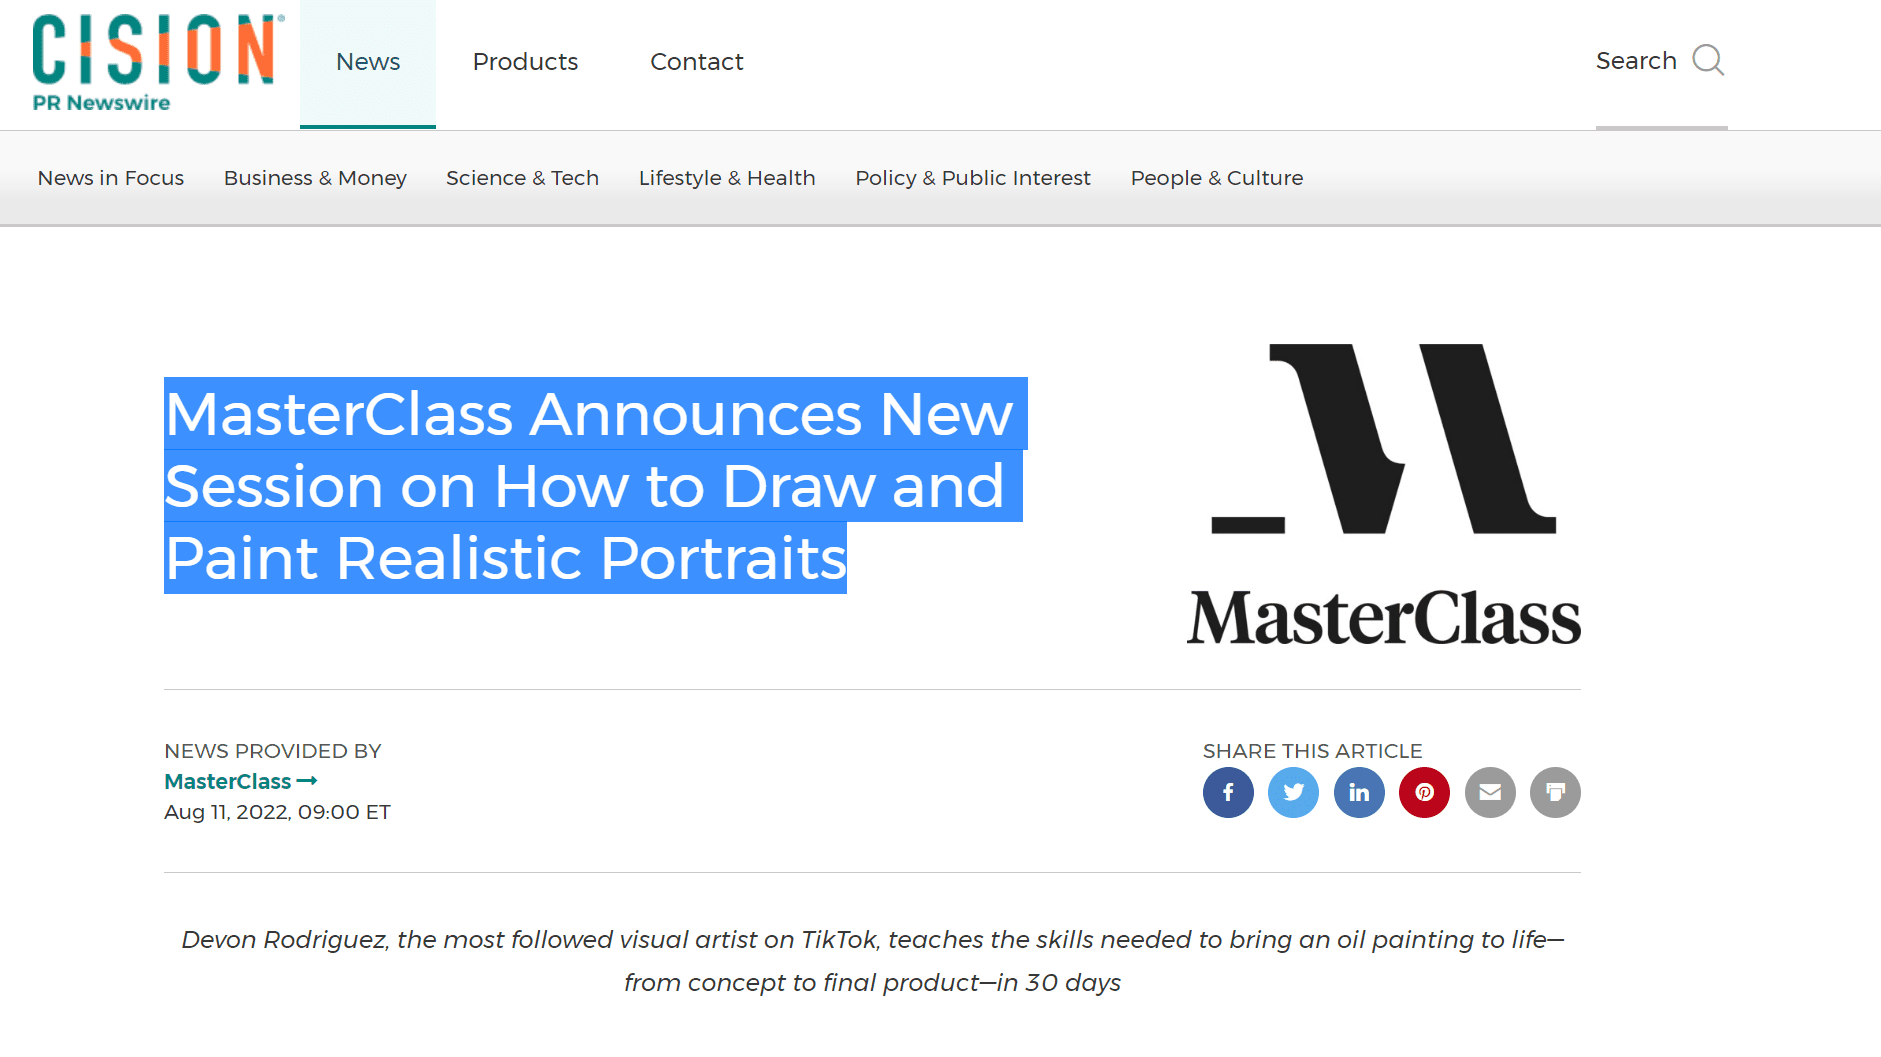 MasterClass Announces New Session on How to Draw and Paint Realistic Portraits